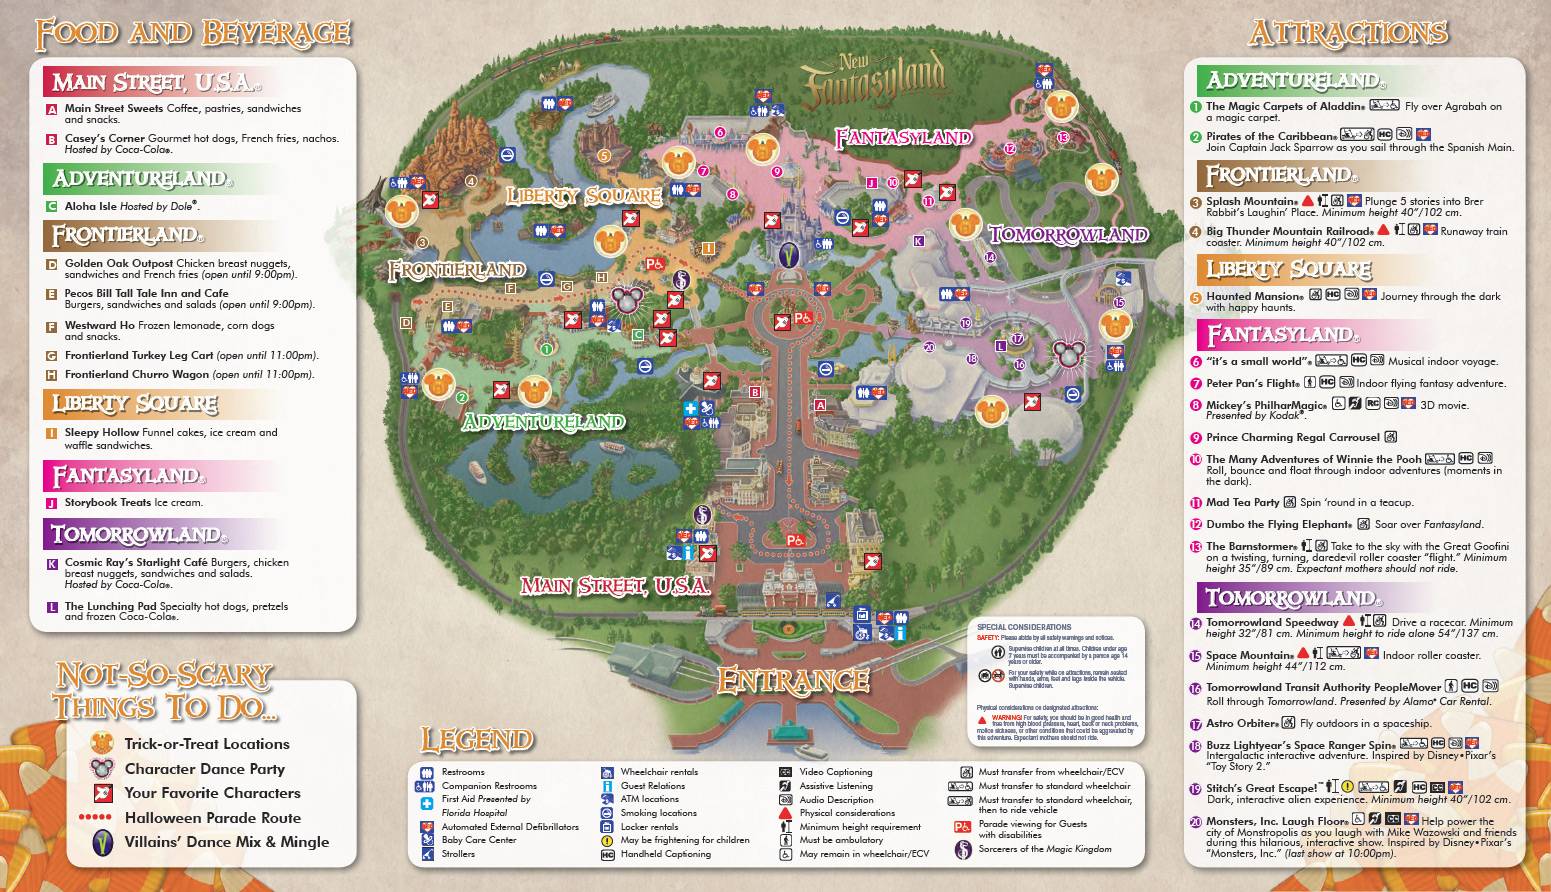 PHOTOS - Mickey's Not-So-Scary Halloween Party 2012 guide map